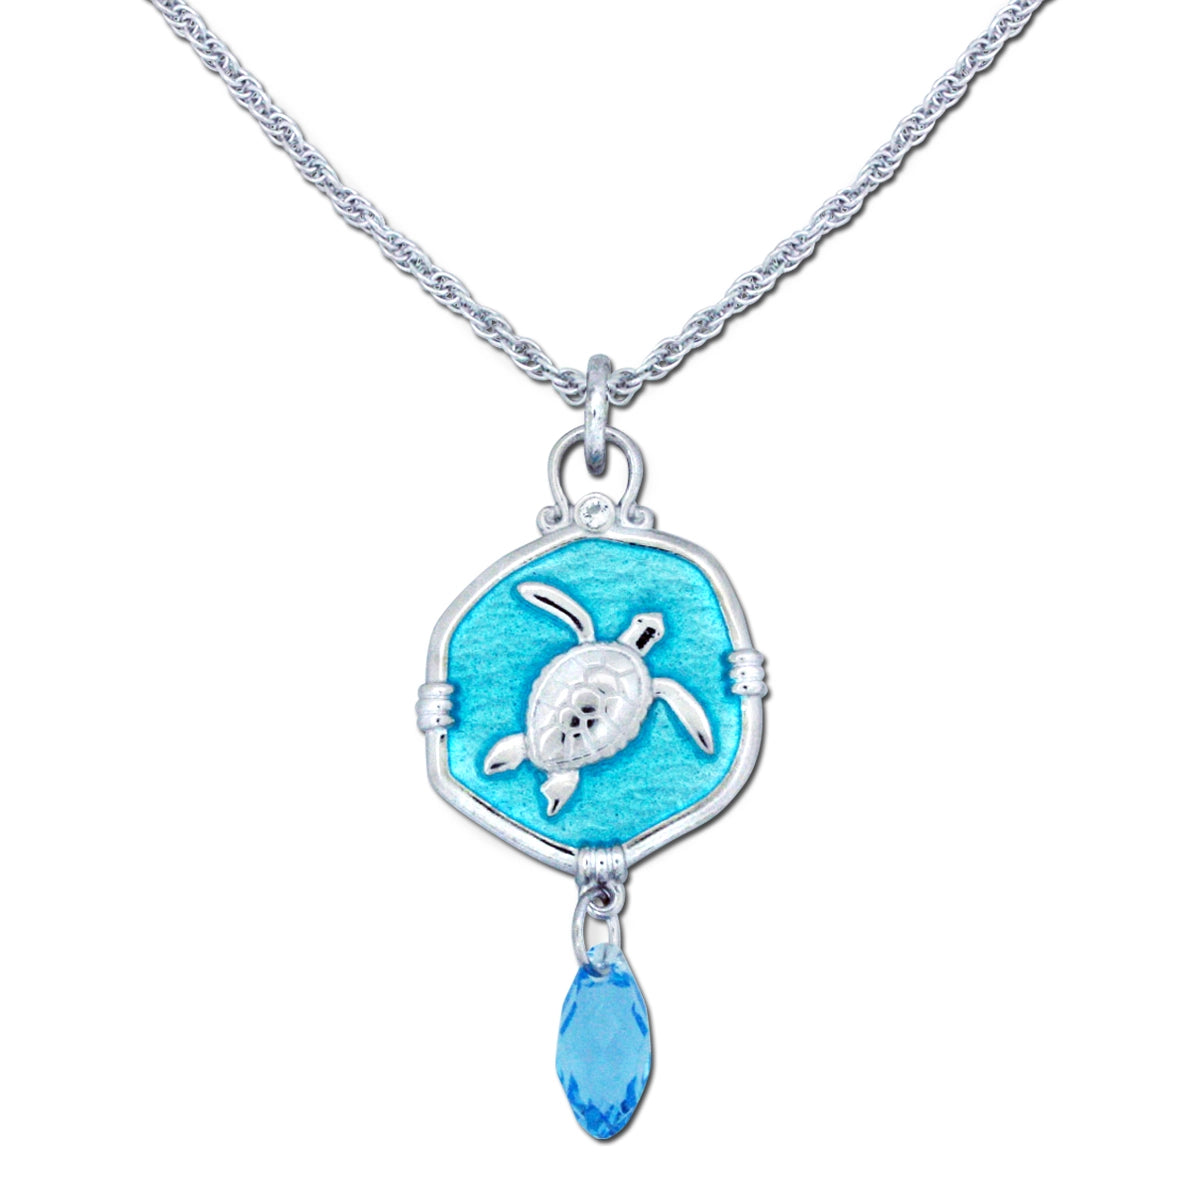 Sea Turtle Lavalier Necklace in Sterling Silver with Hard Fired Enamel and Swarovski Briolette